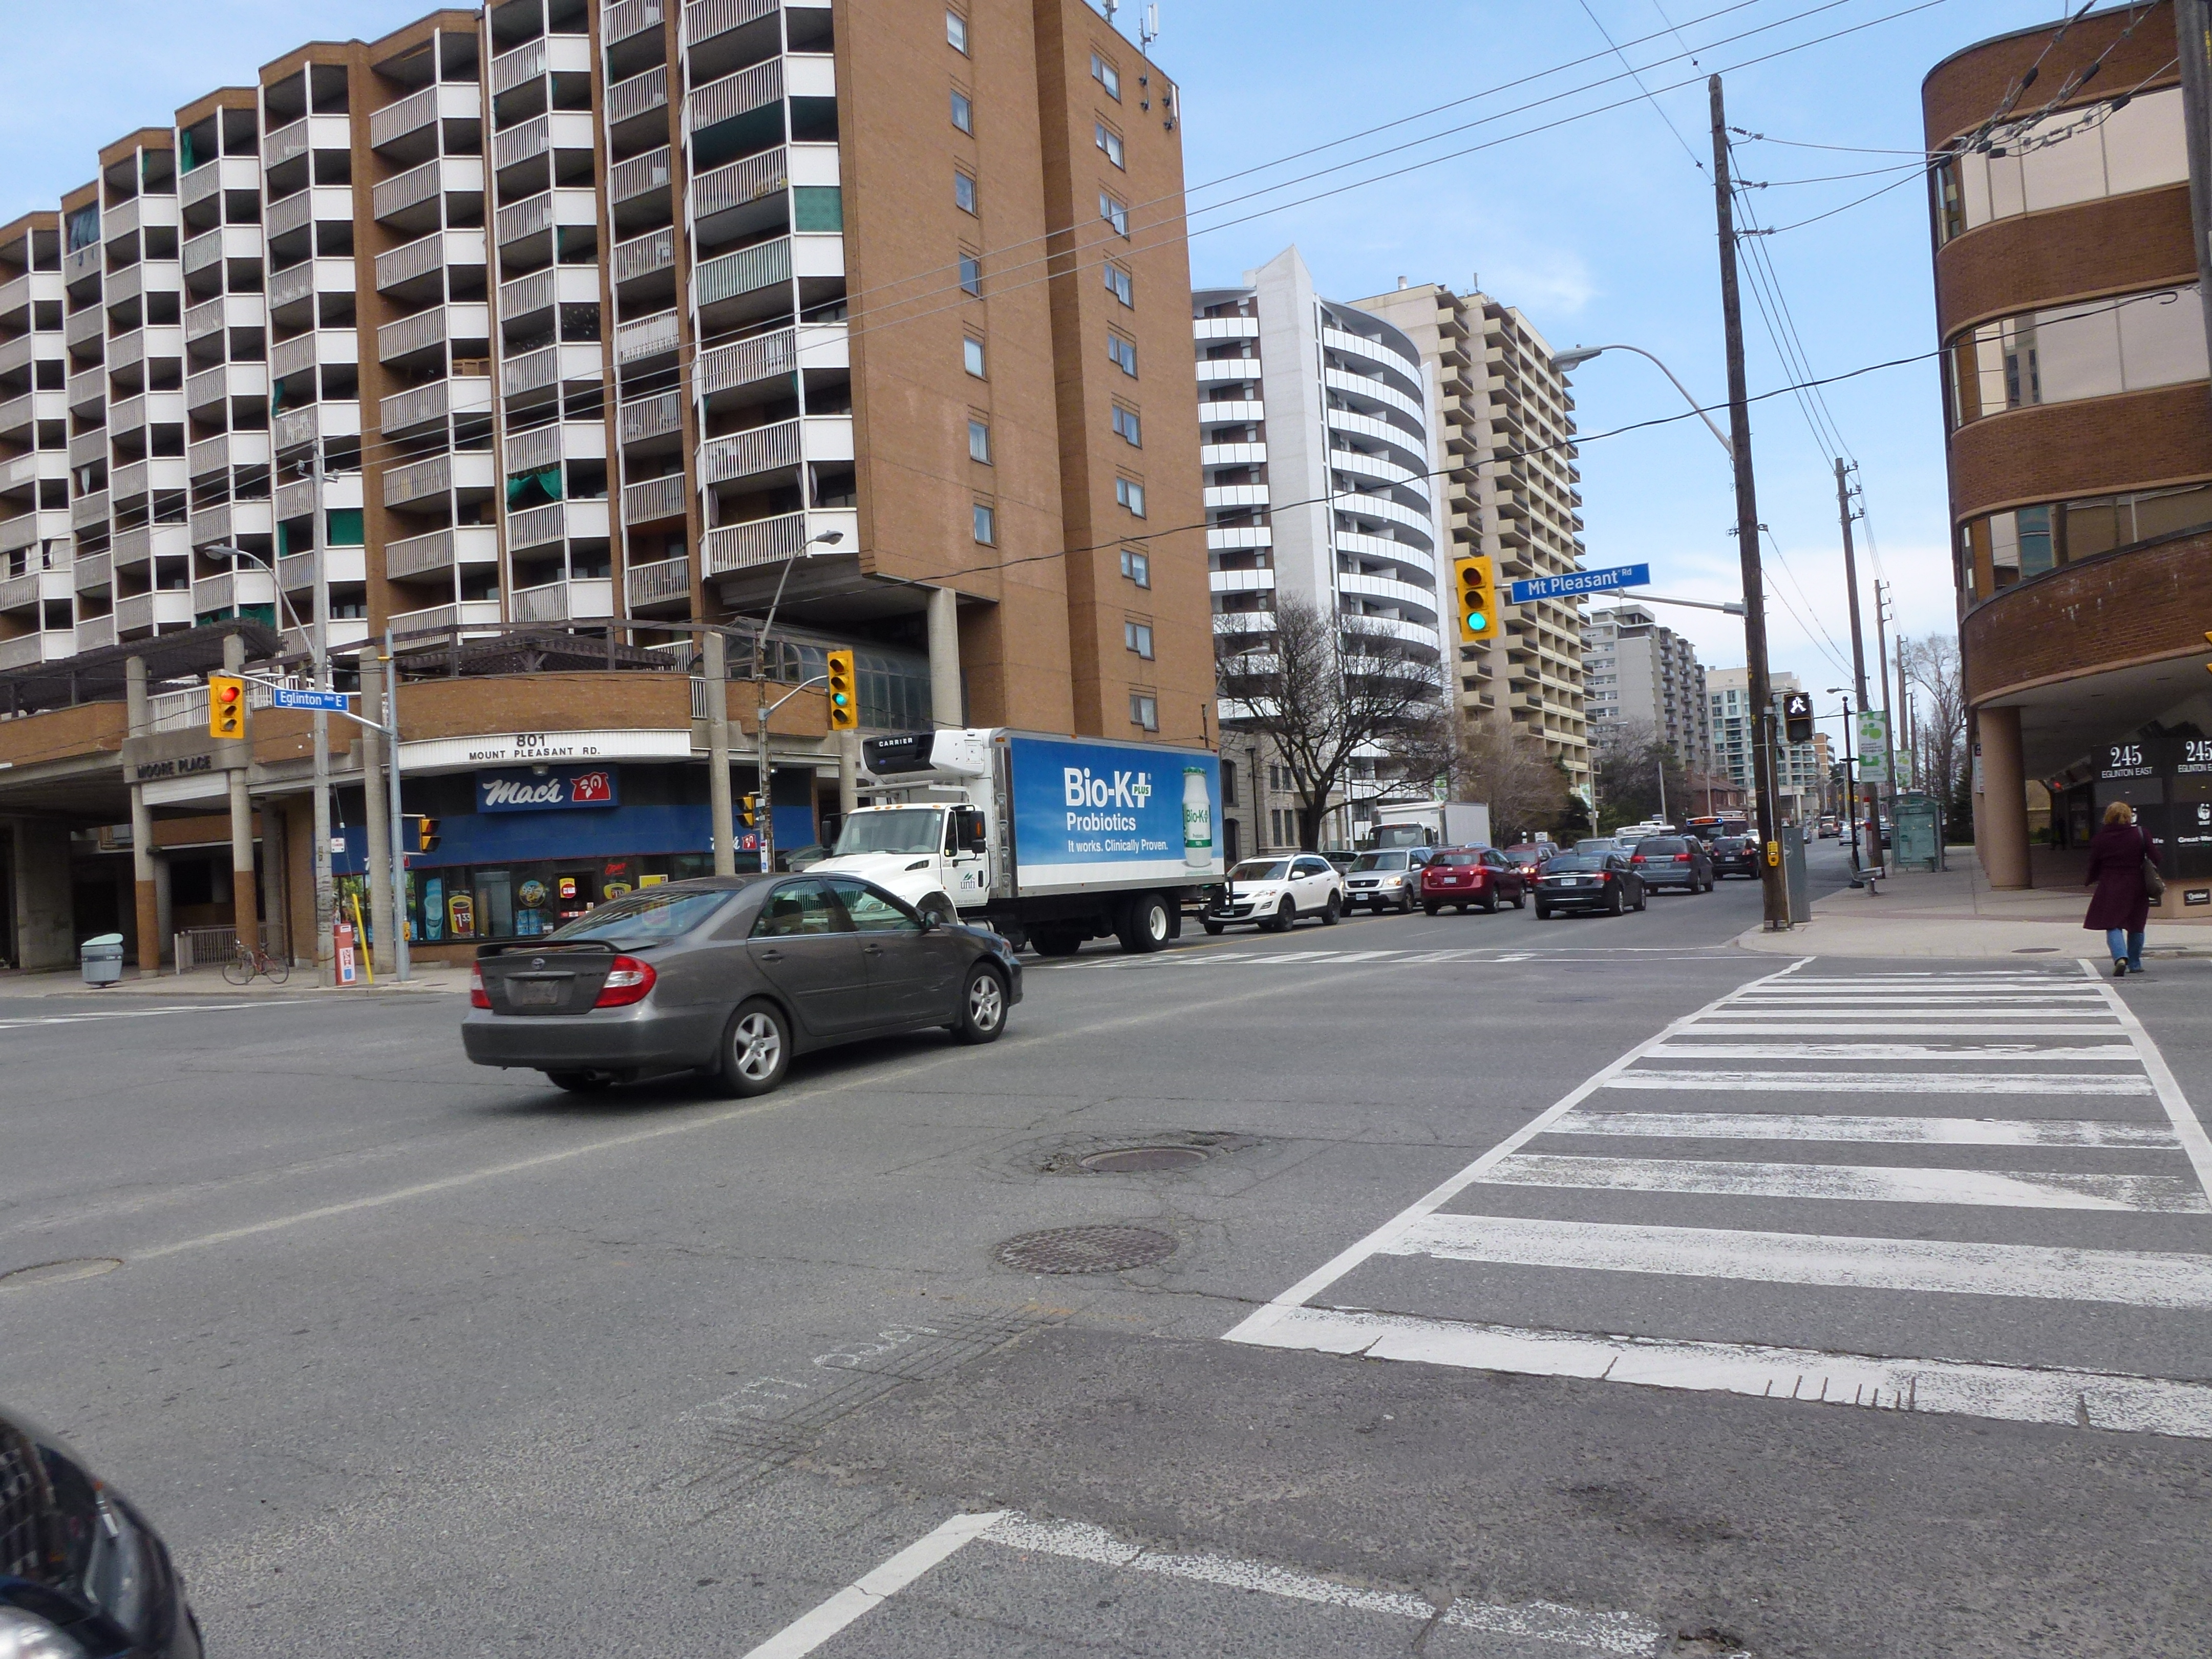 Parts of panoramas of intersections where there will be eglinton crosstown lrt stations, gps embedded, taken 2013 04 25 (4).jpg photo